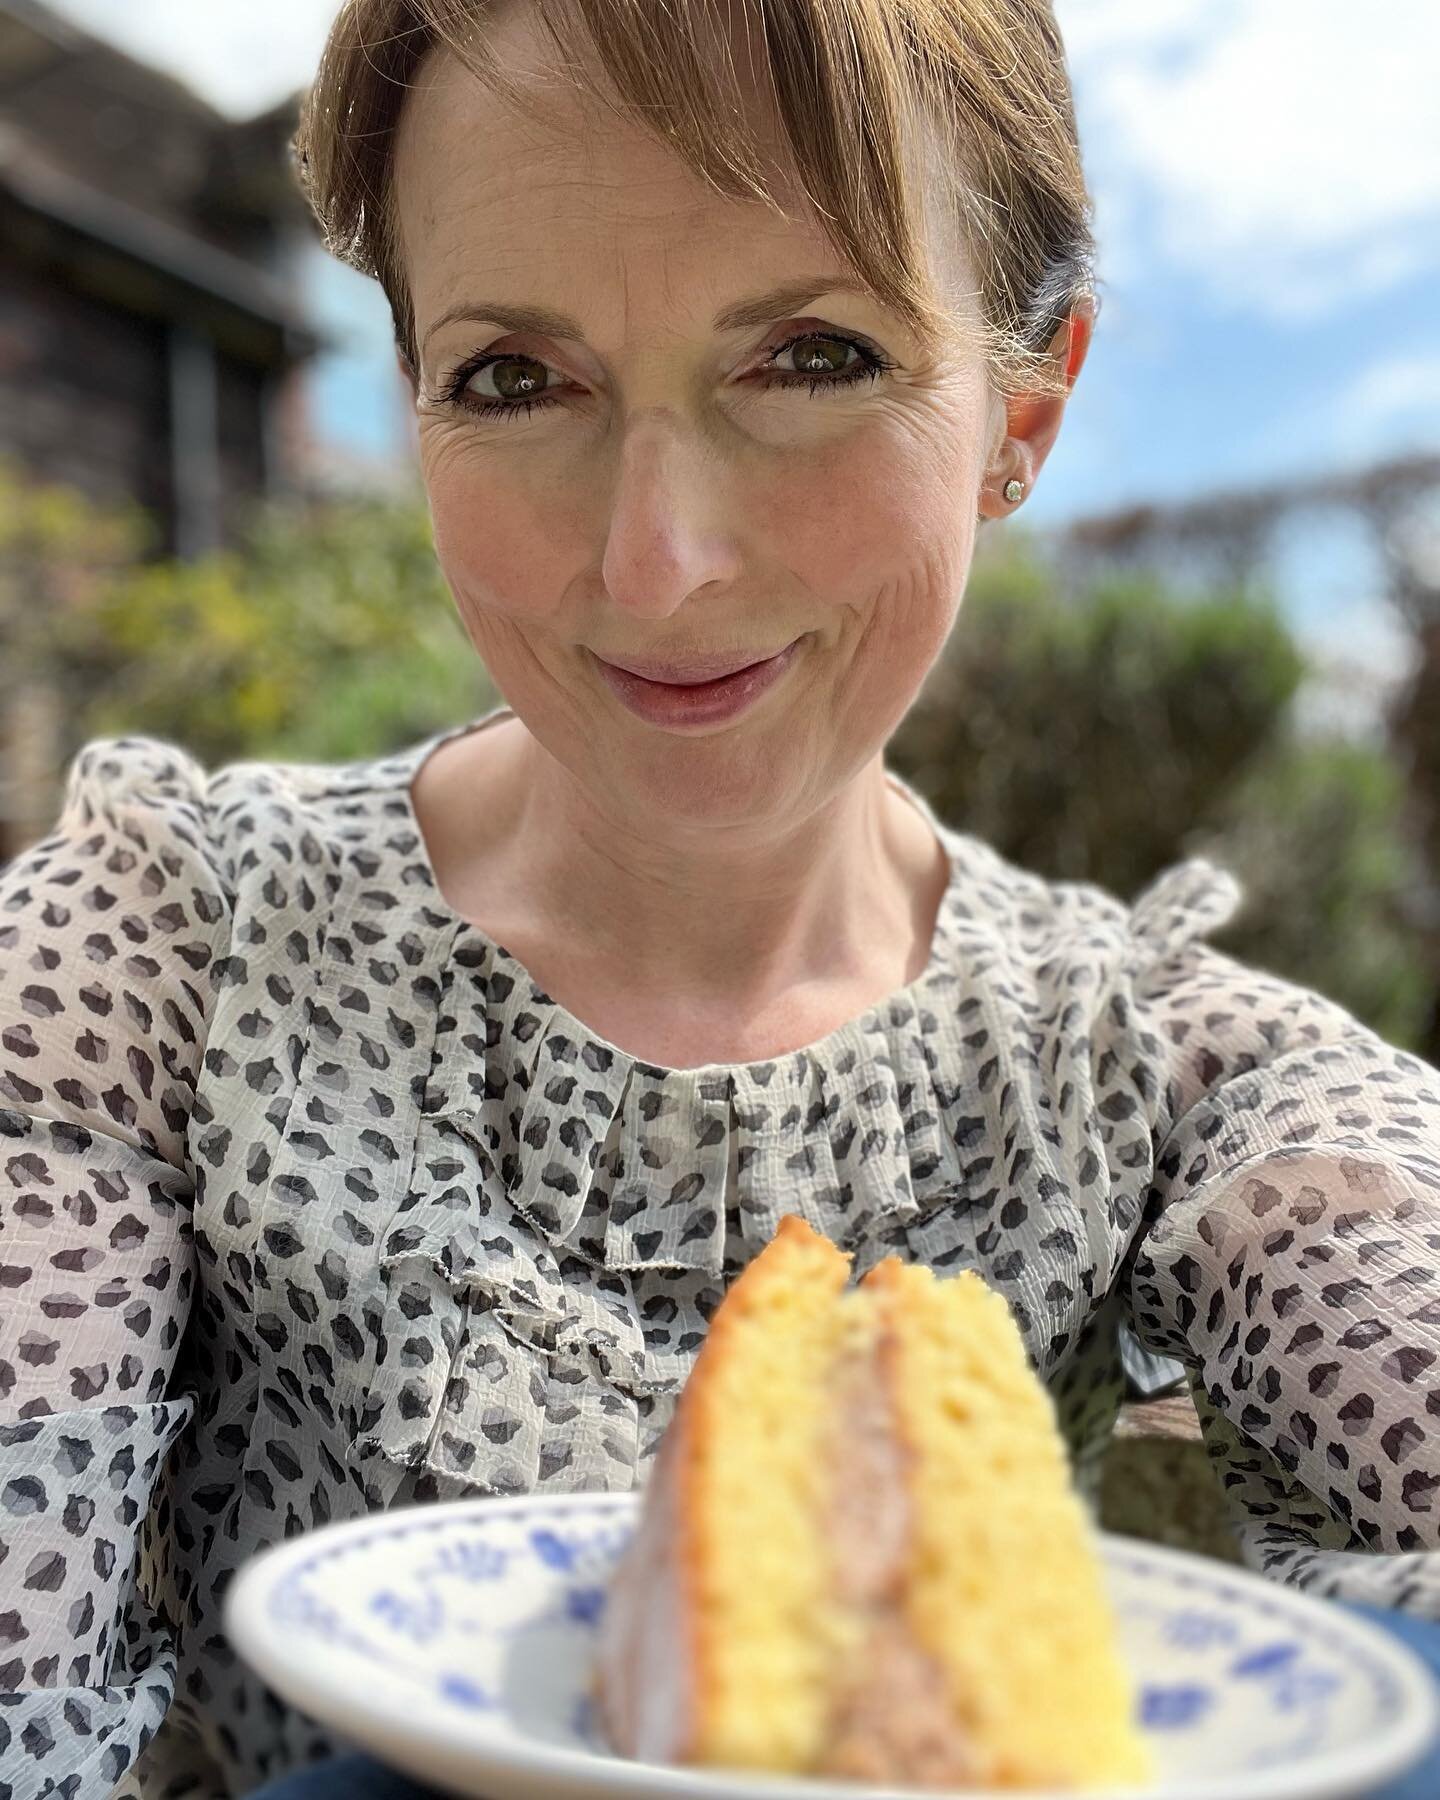 A strange thing happened last week.

I was at a dinner and as a delicious-looking brownie was put down in front of me, a stranger shouted across the table, &quot;You're not going to eat that are you?&quot;.

It turned out that my husband had told her